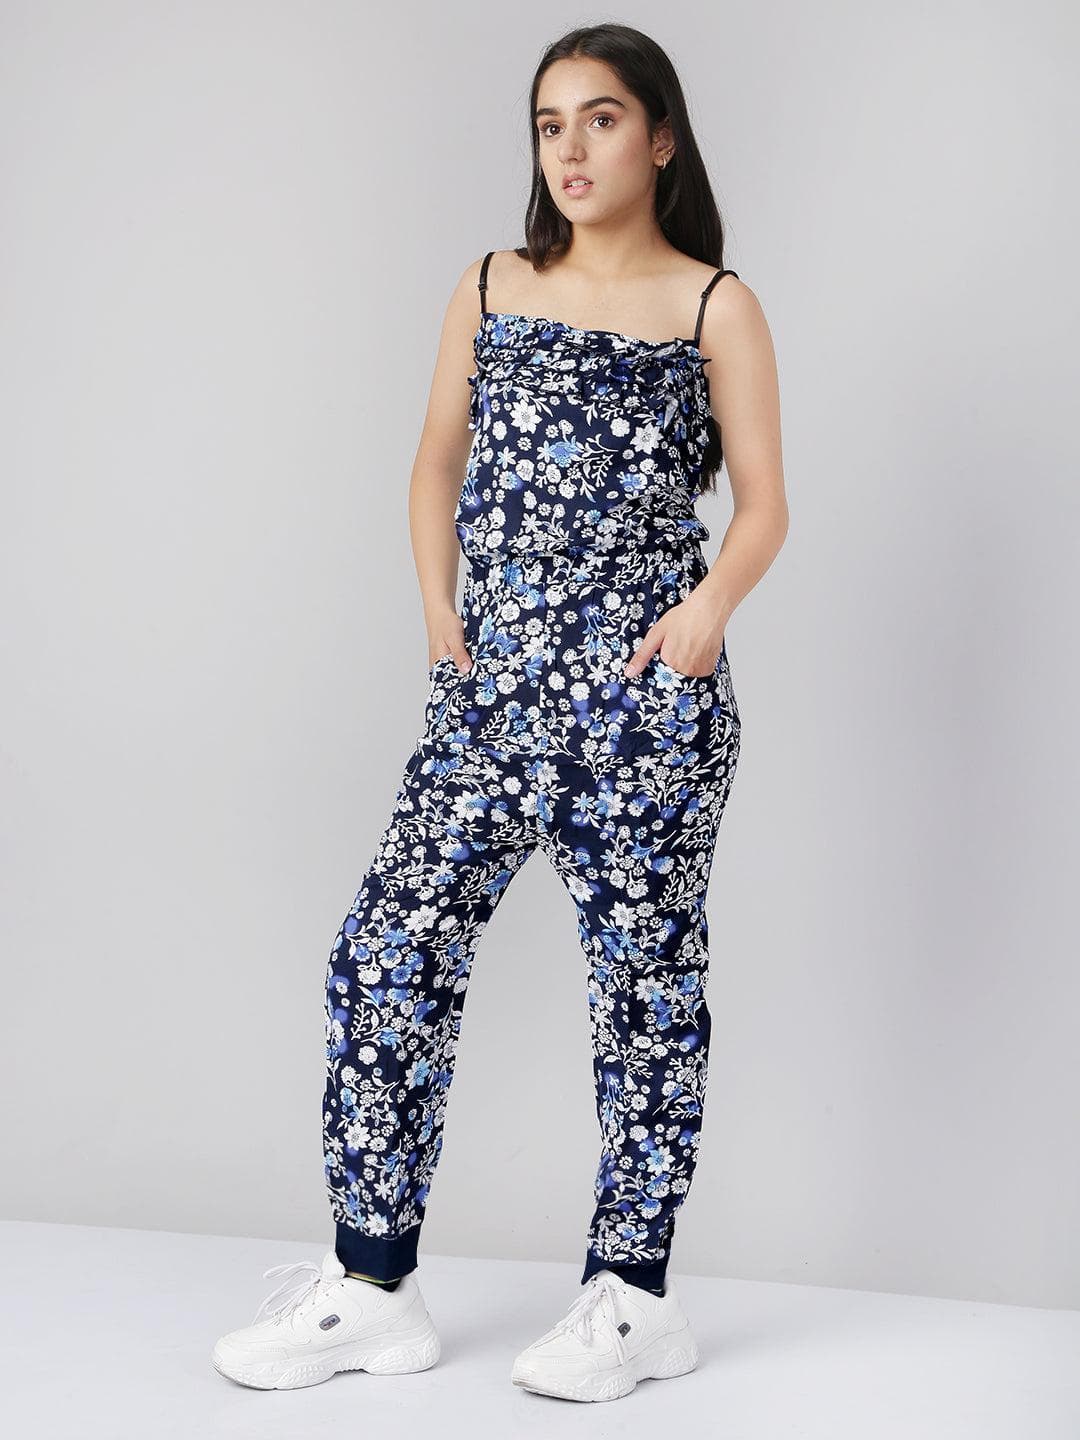 Buy Naughty Ninos Girls Navy Blue Floral Printed Jumpsuit(MM00526DRS_Navy  Blue_3-4 Years) at Amazon.in